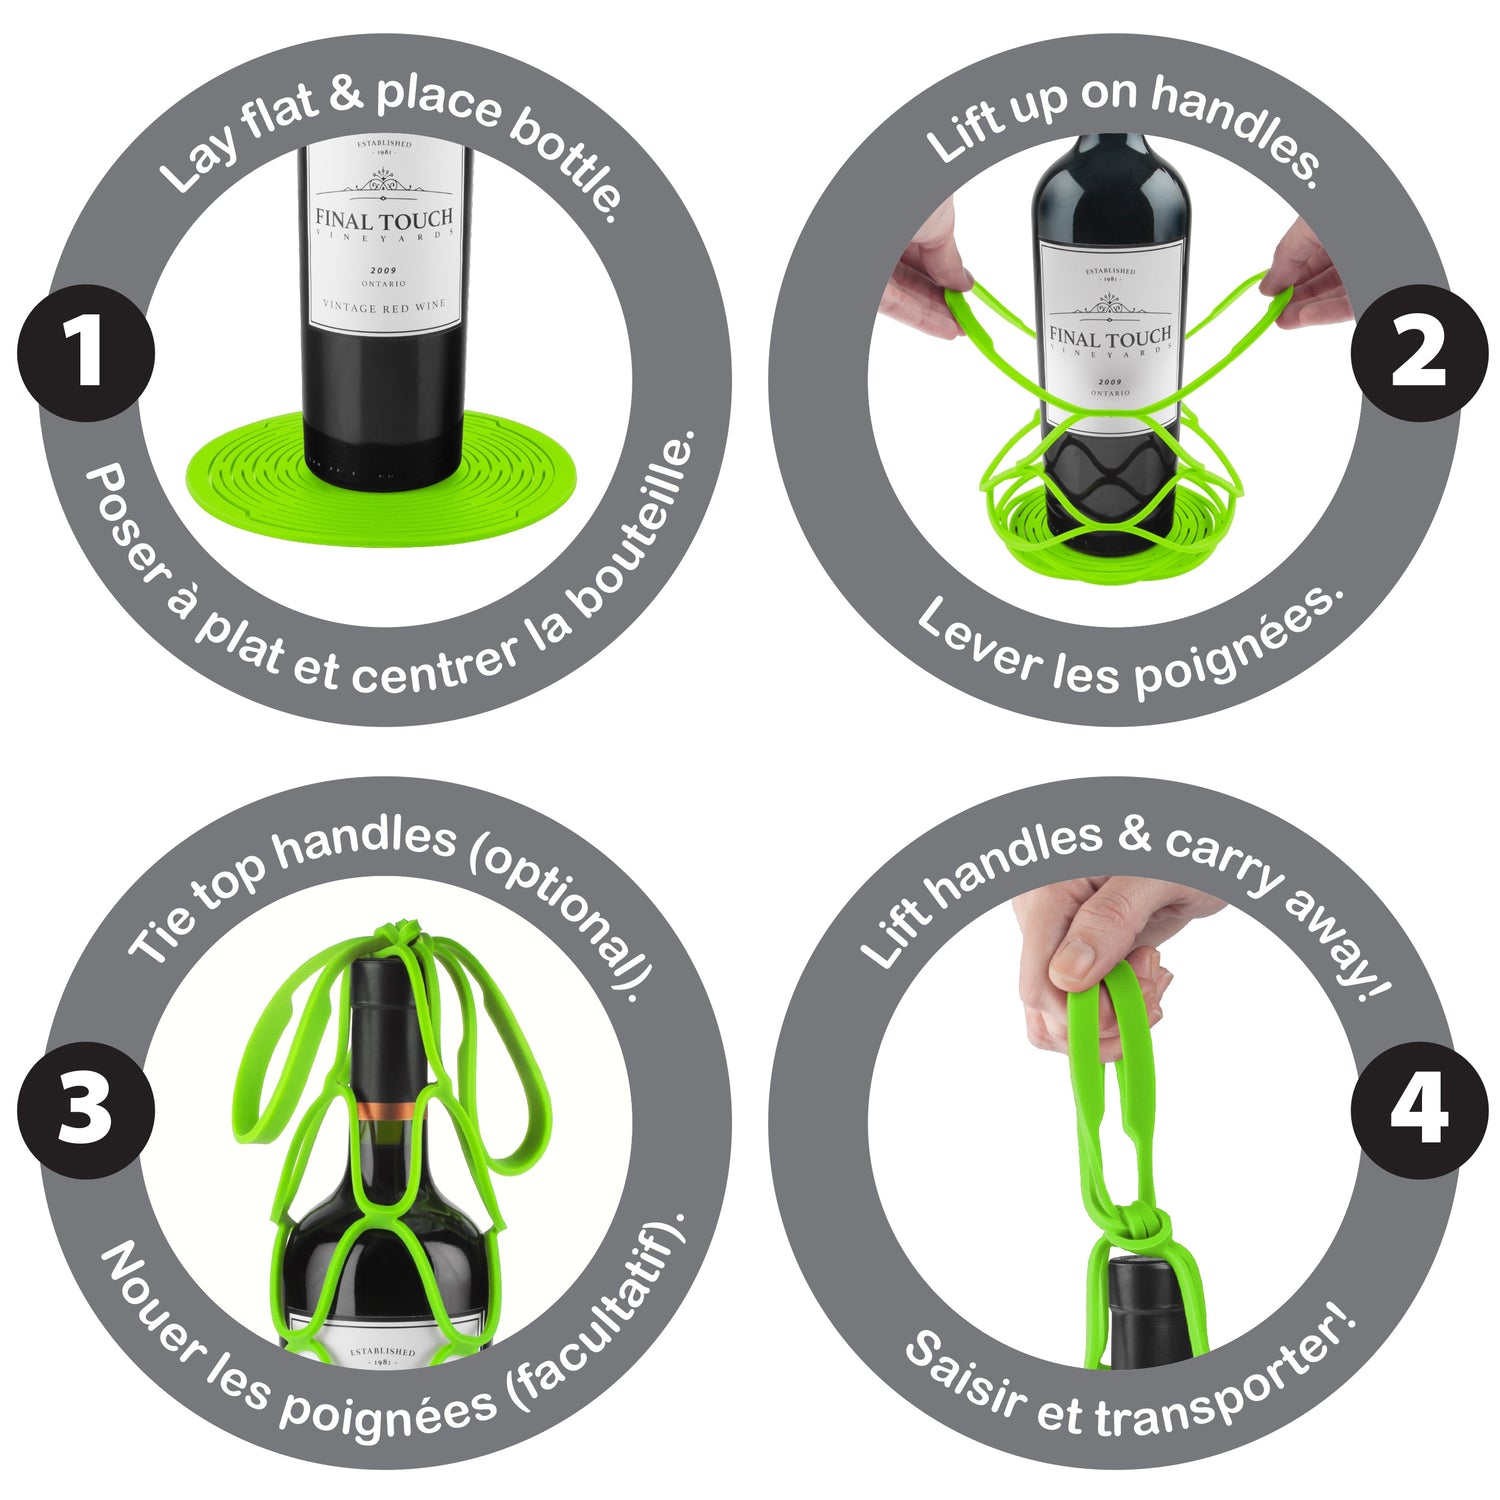 Up&Away Collapsible Silicone Bottle Bag - Green